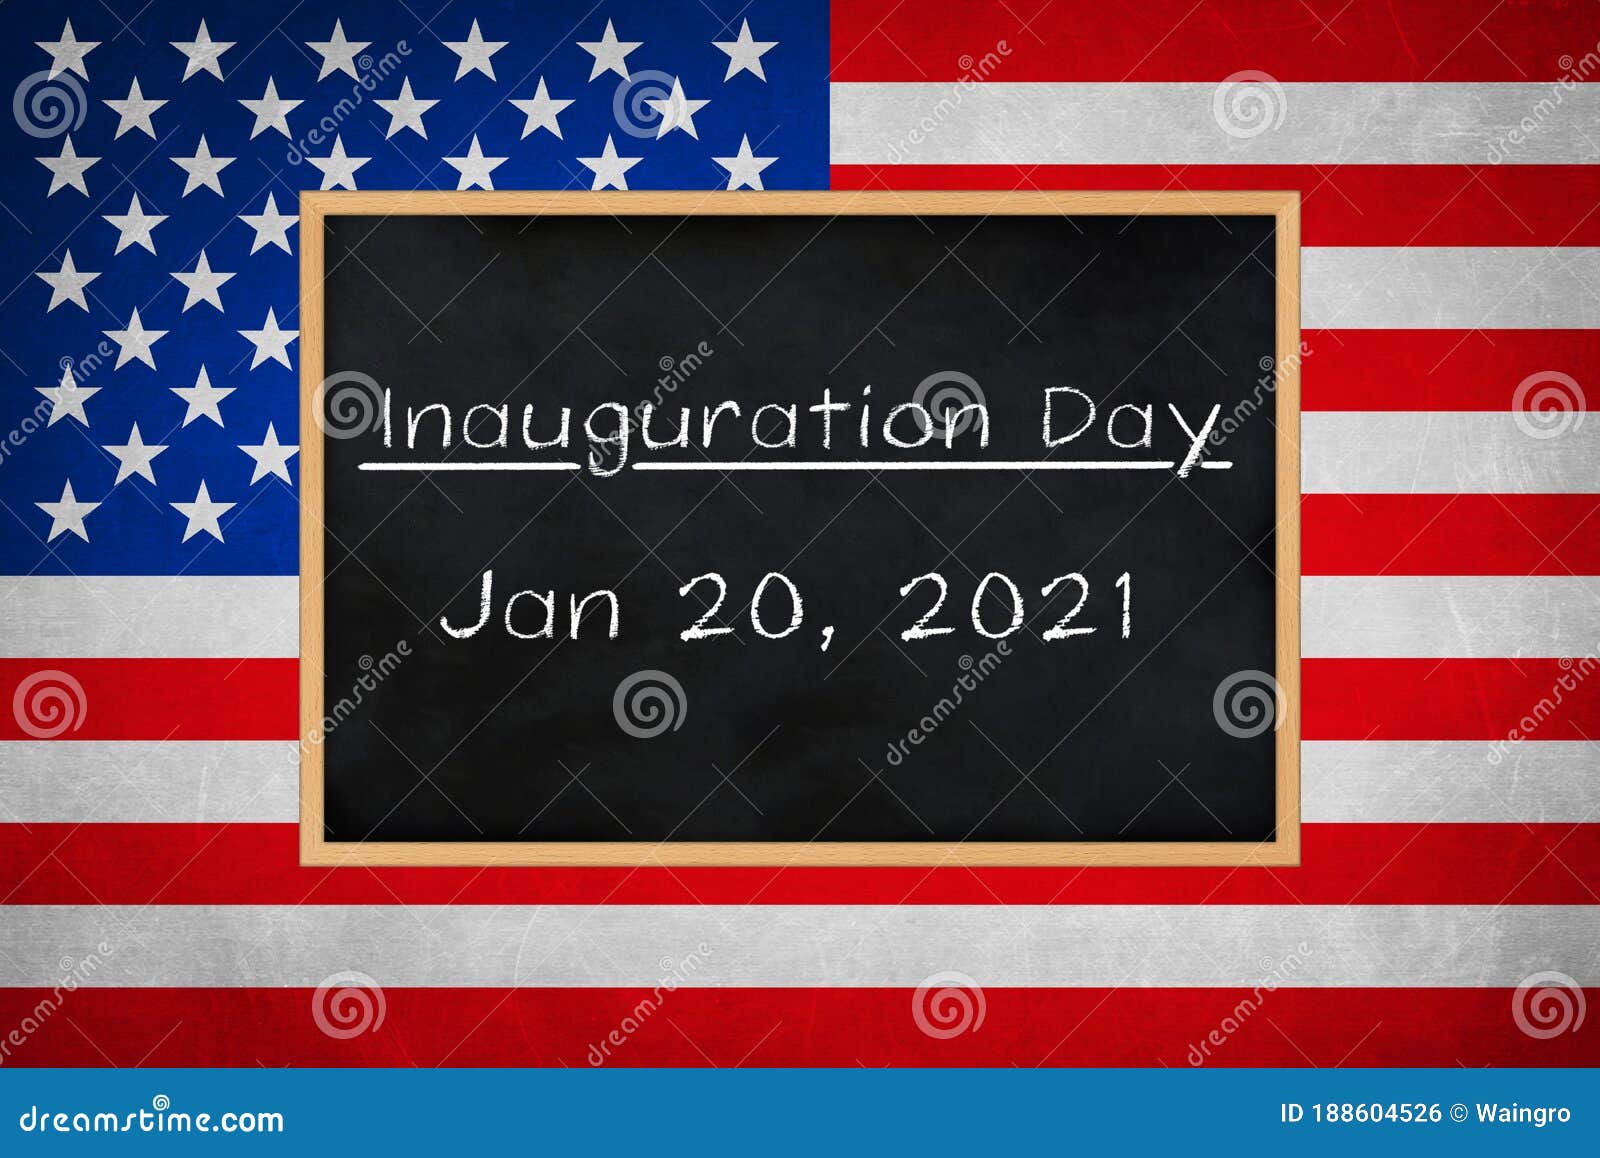 inauguration day 2021 - chalkboard concept with usa flag background